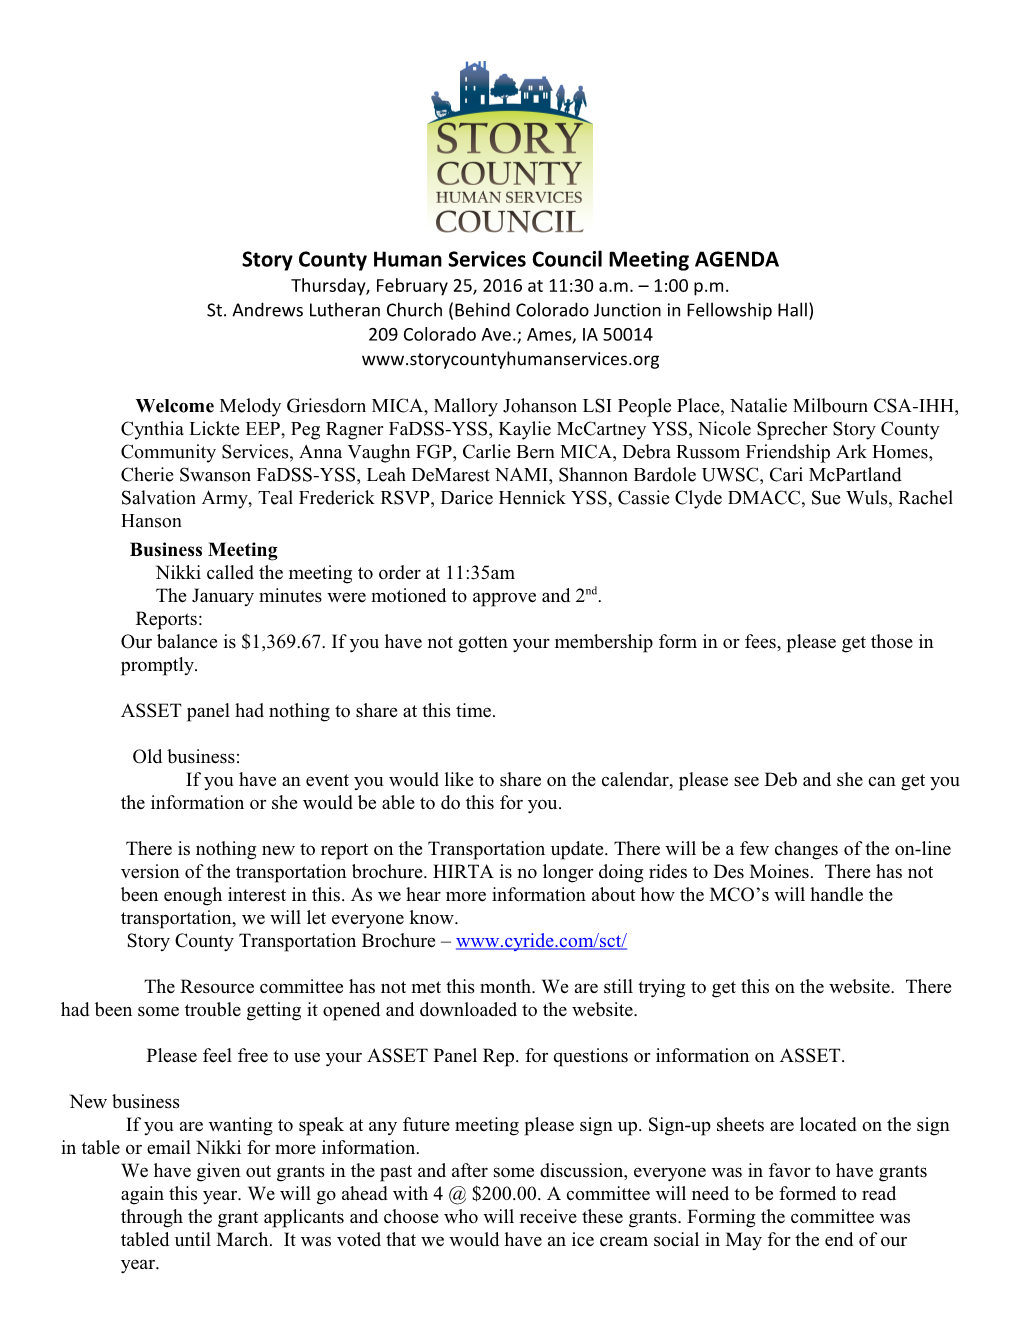 Story County Human Services Council Meetingagenda